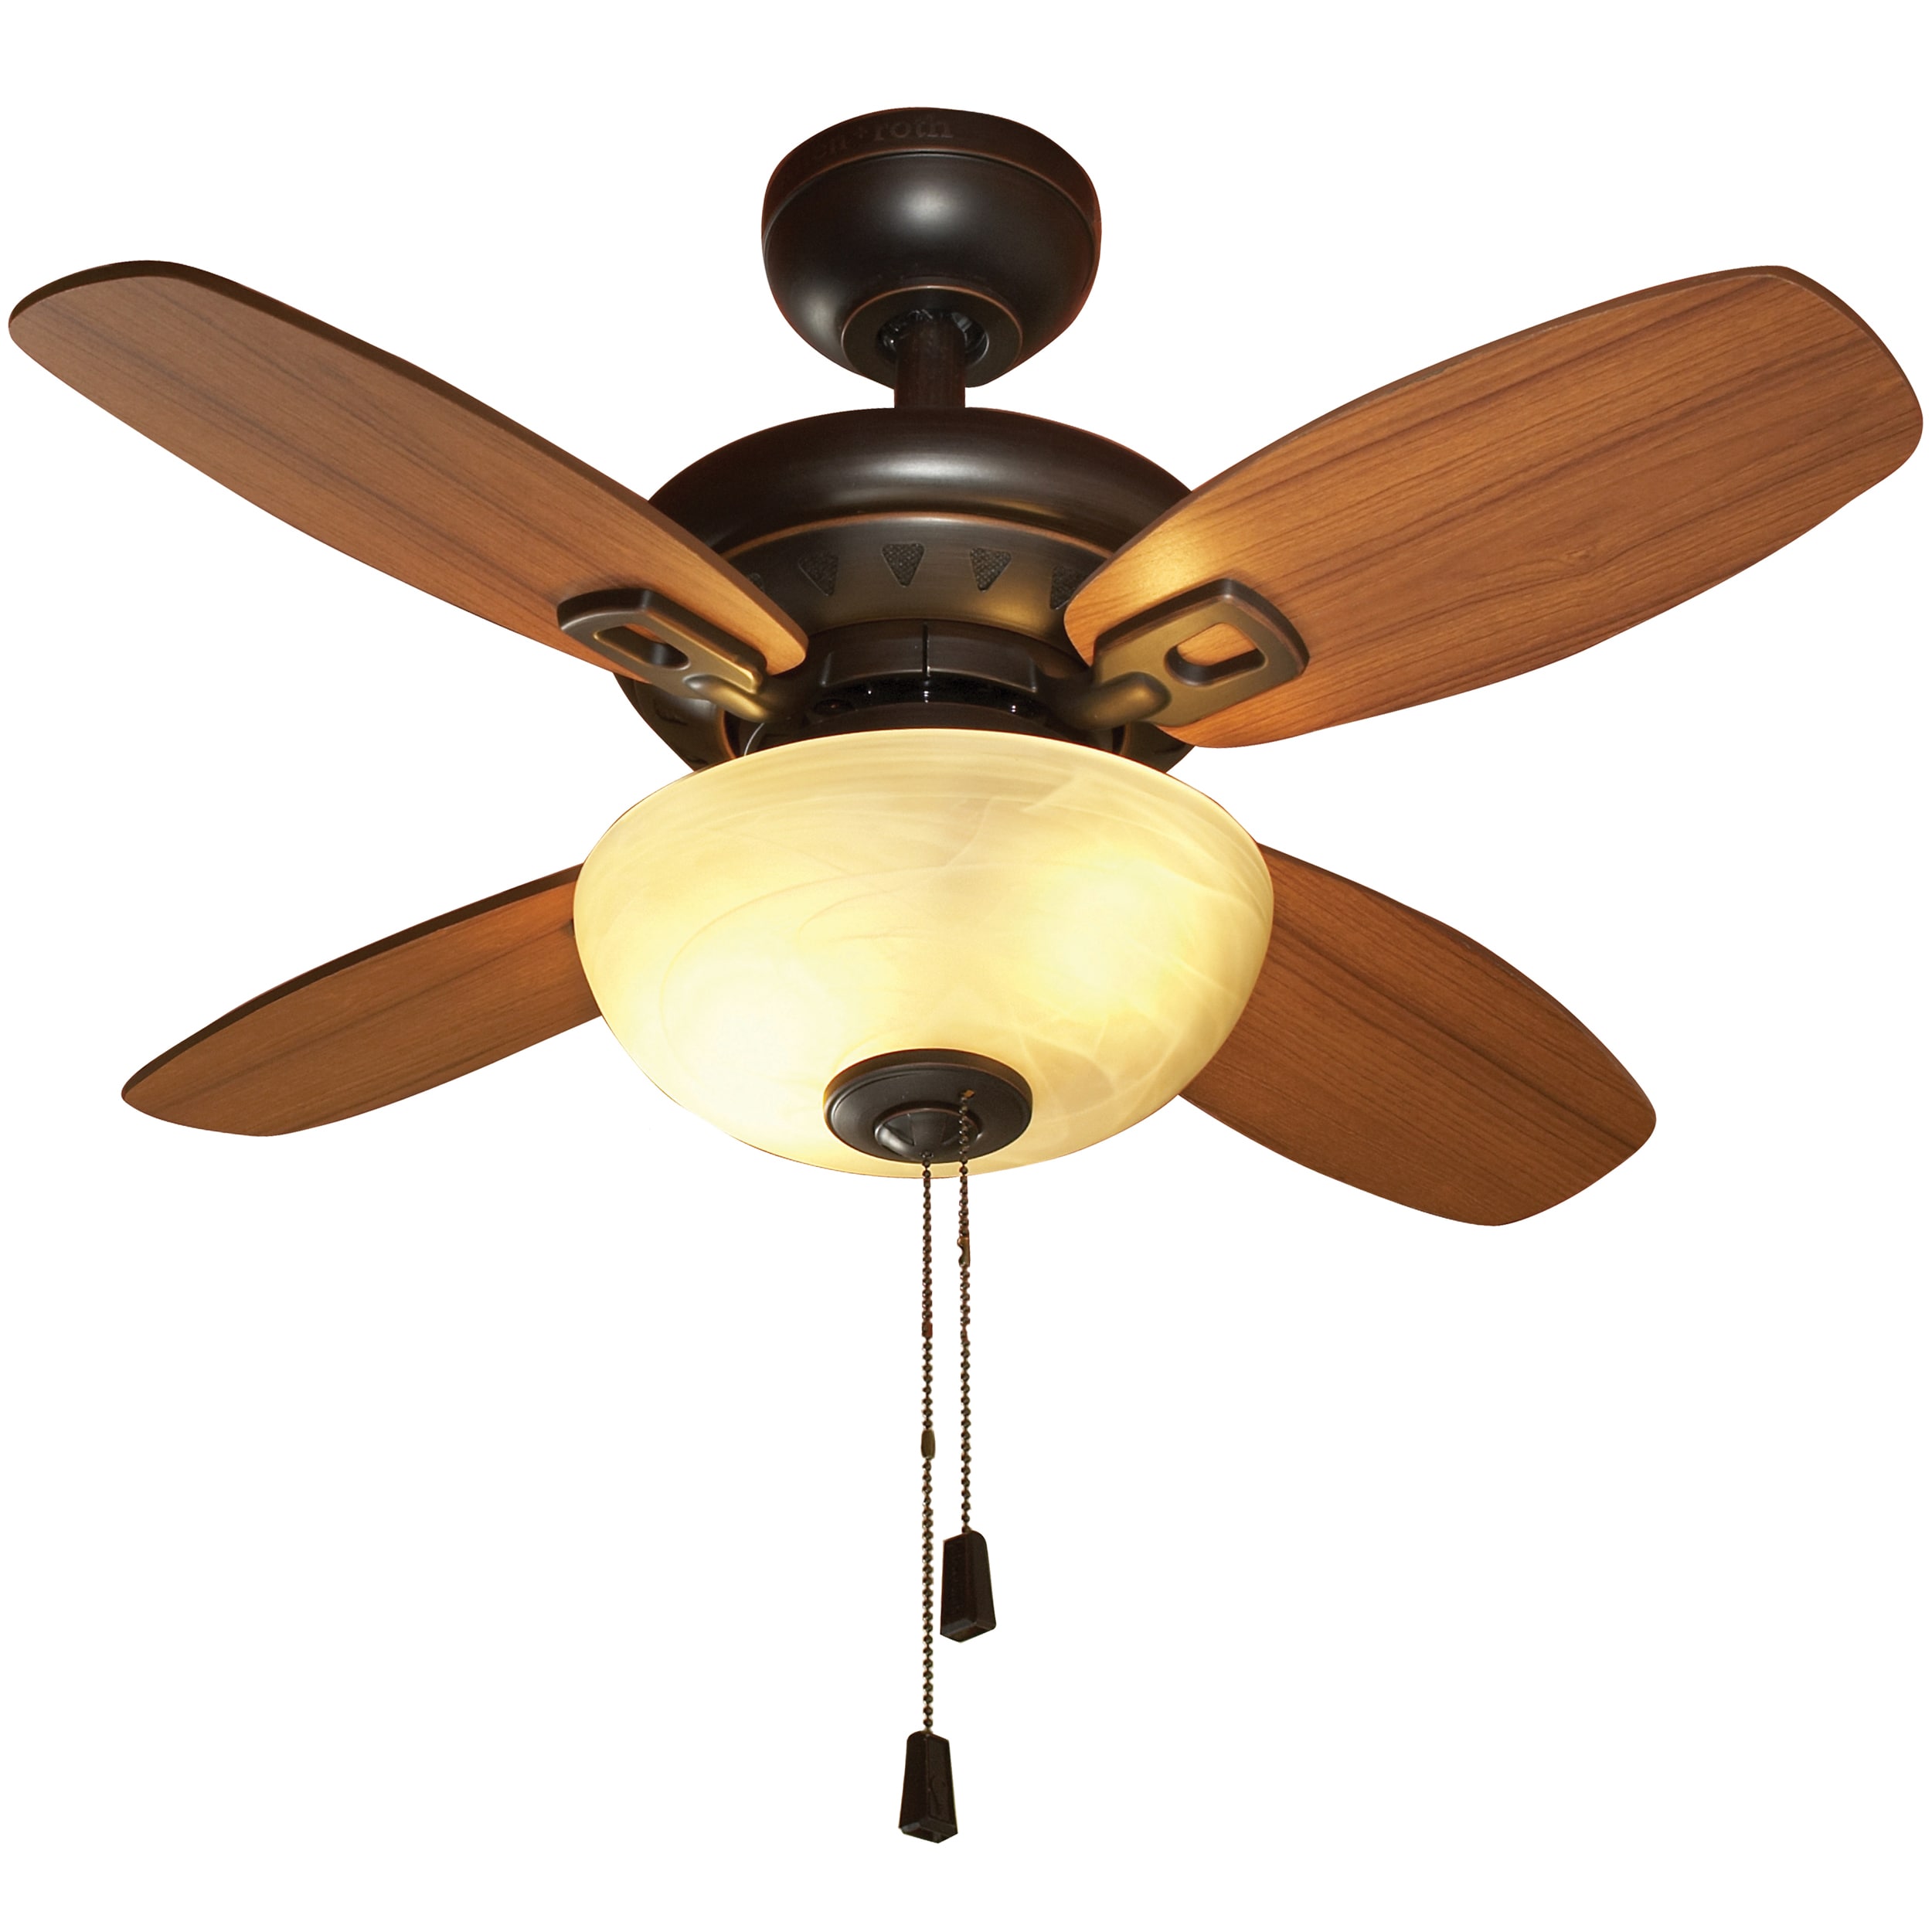 allen + roth Laralyn 32-in Dark Oil-Rubbed Downrod or Flush Mount Ceiling Fan with Light (4-Blade) at Lowes.com